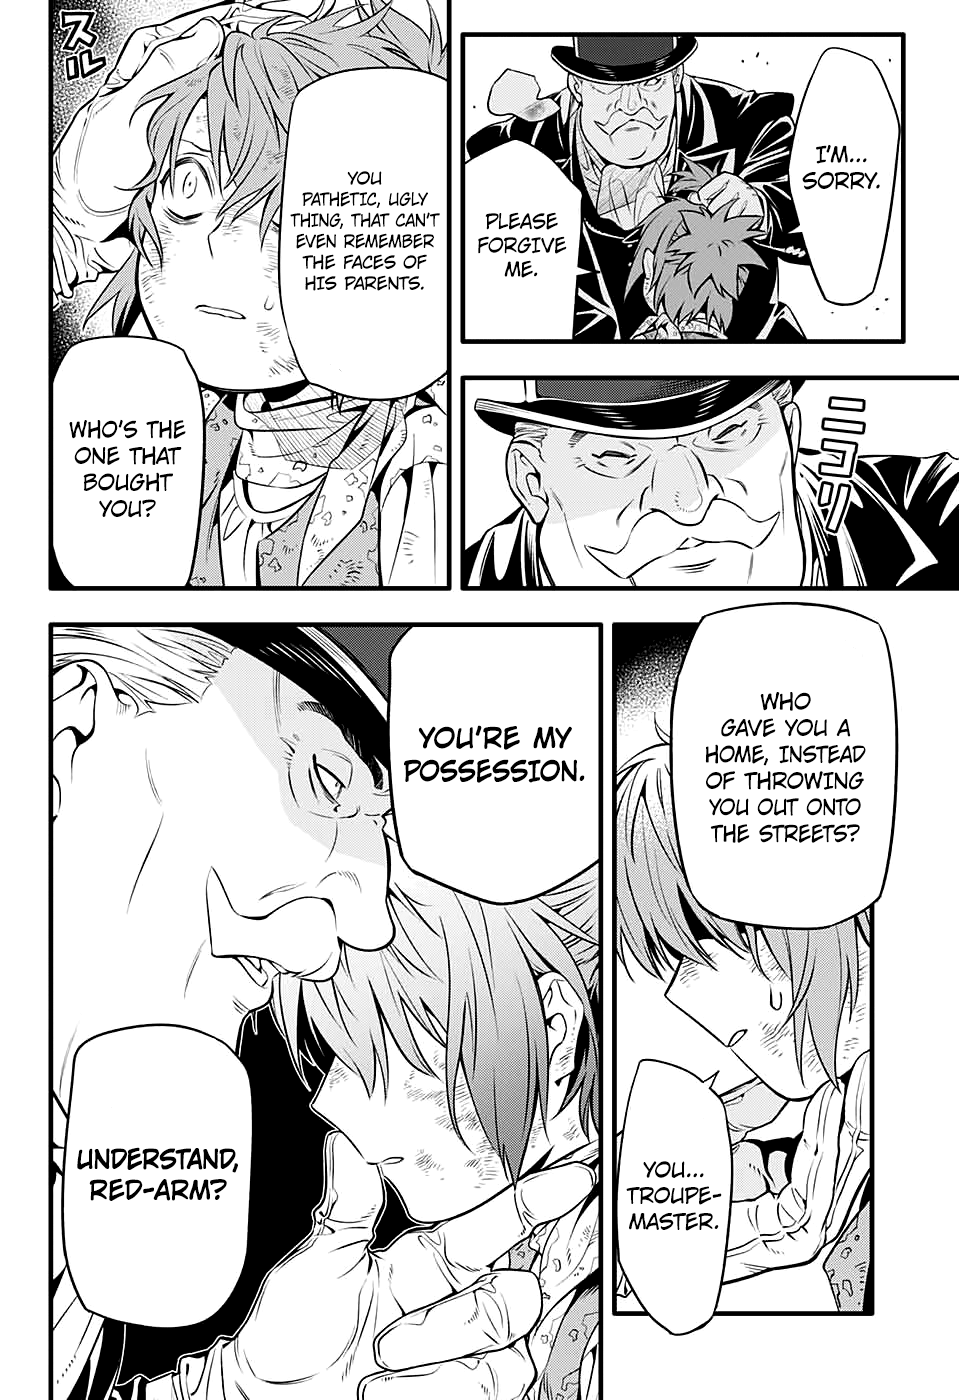 D.Gray-man chapter 232 page 24